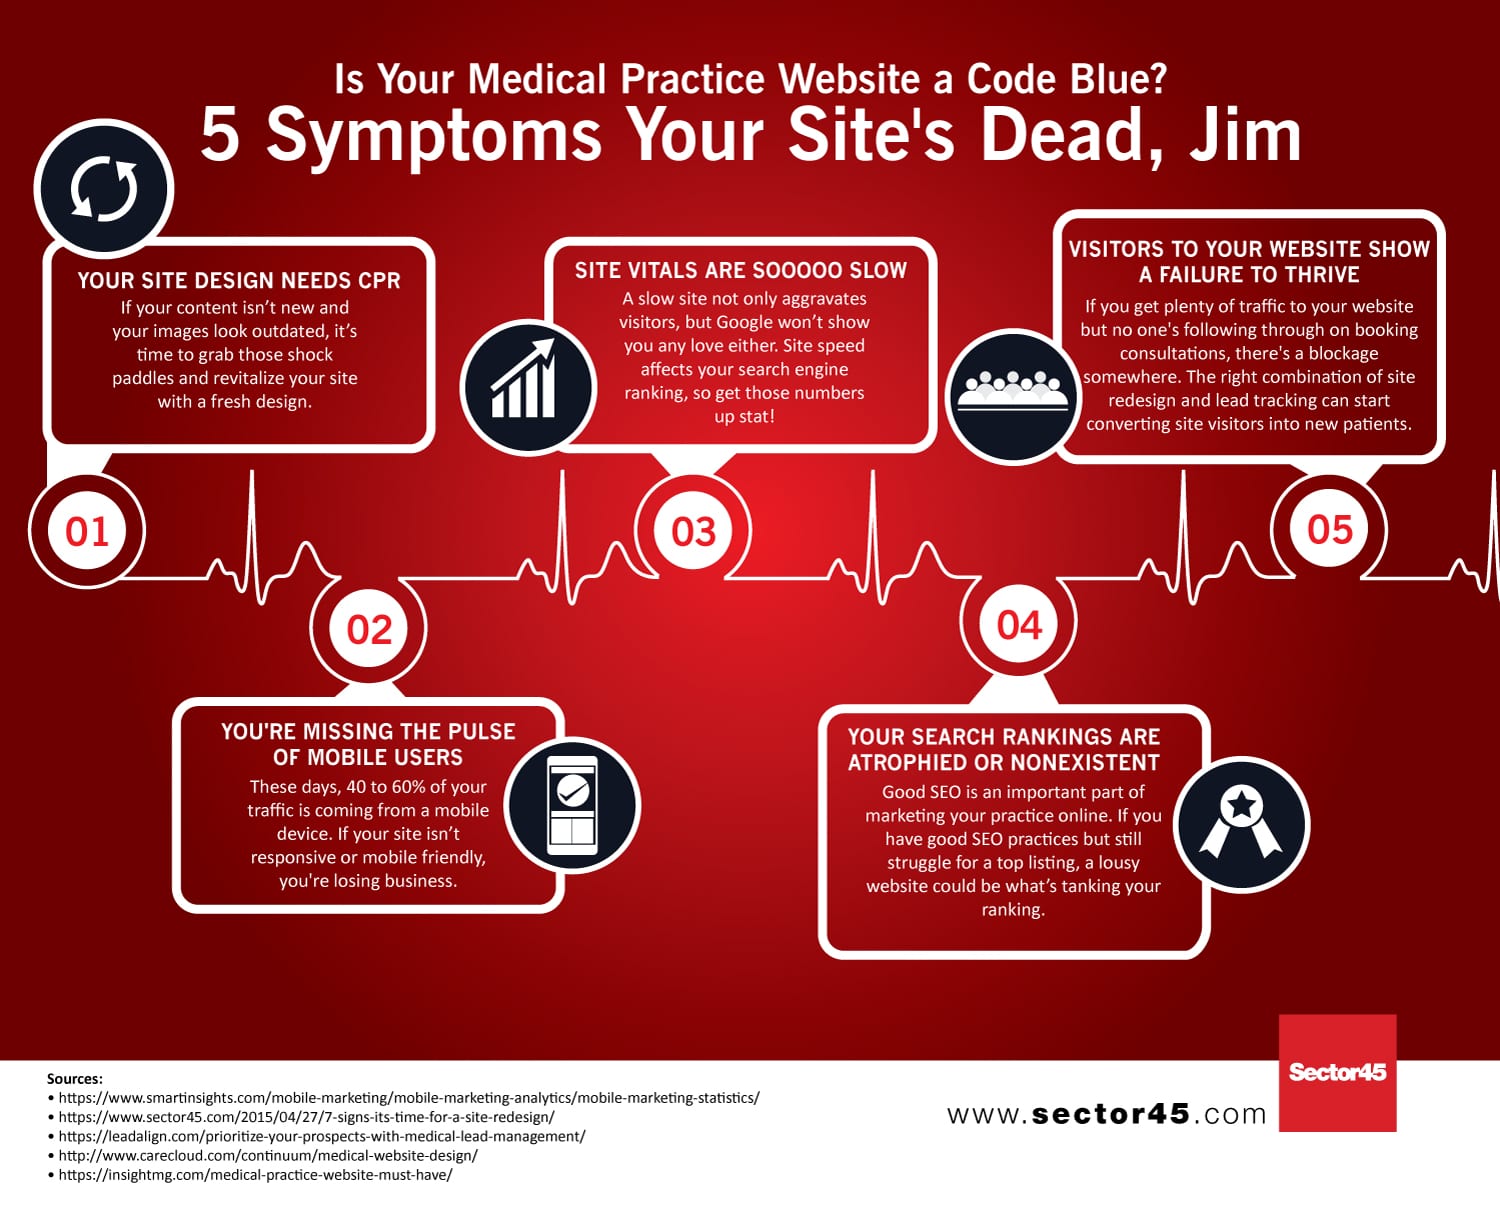 Is Your Medical Practice Website a Code Blue